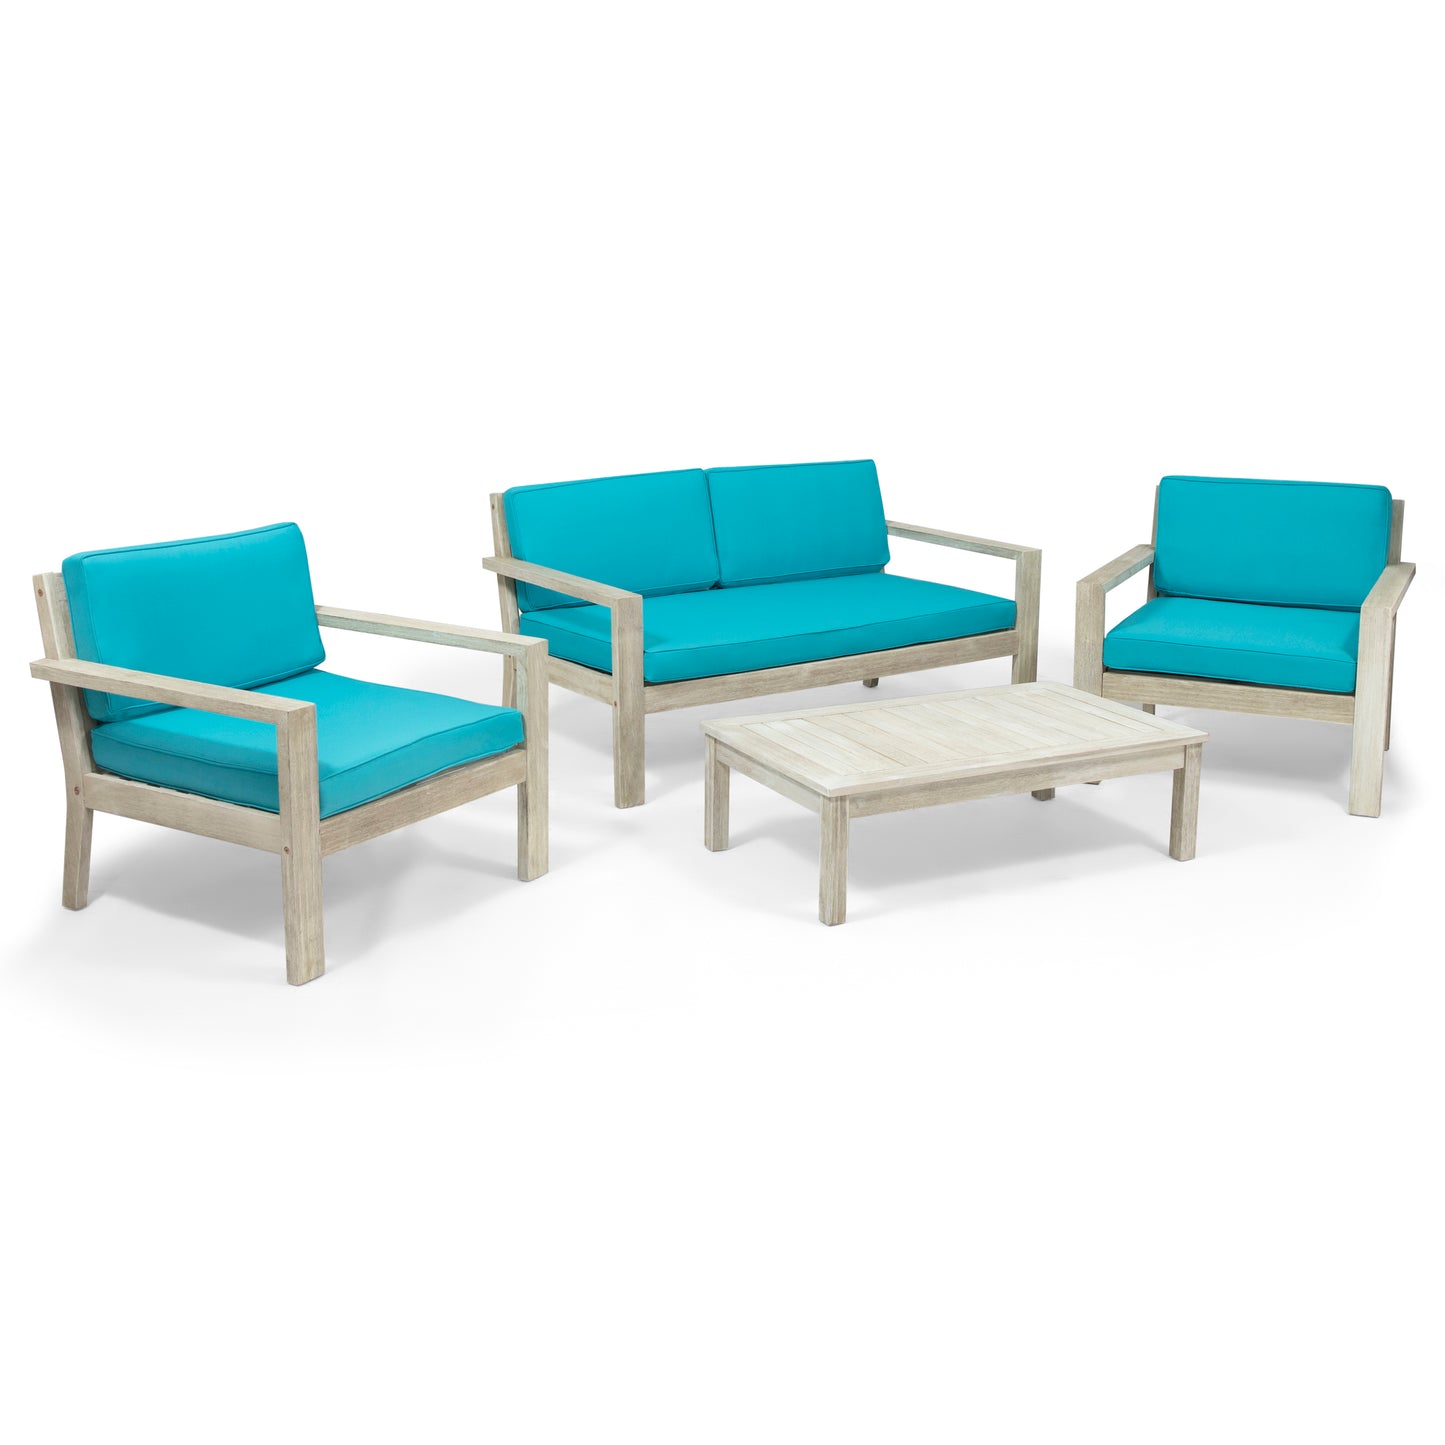 Dominic Outdoor 4 Seater Acacia Wood Chat Set with Cushions